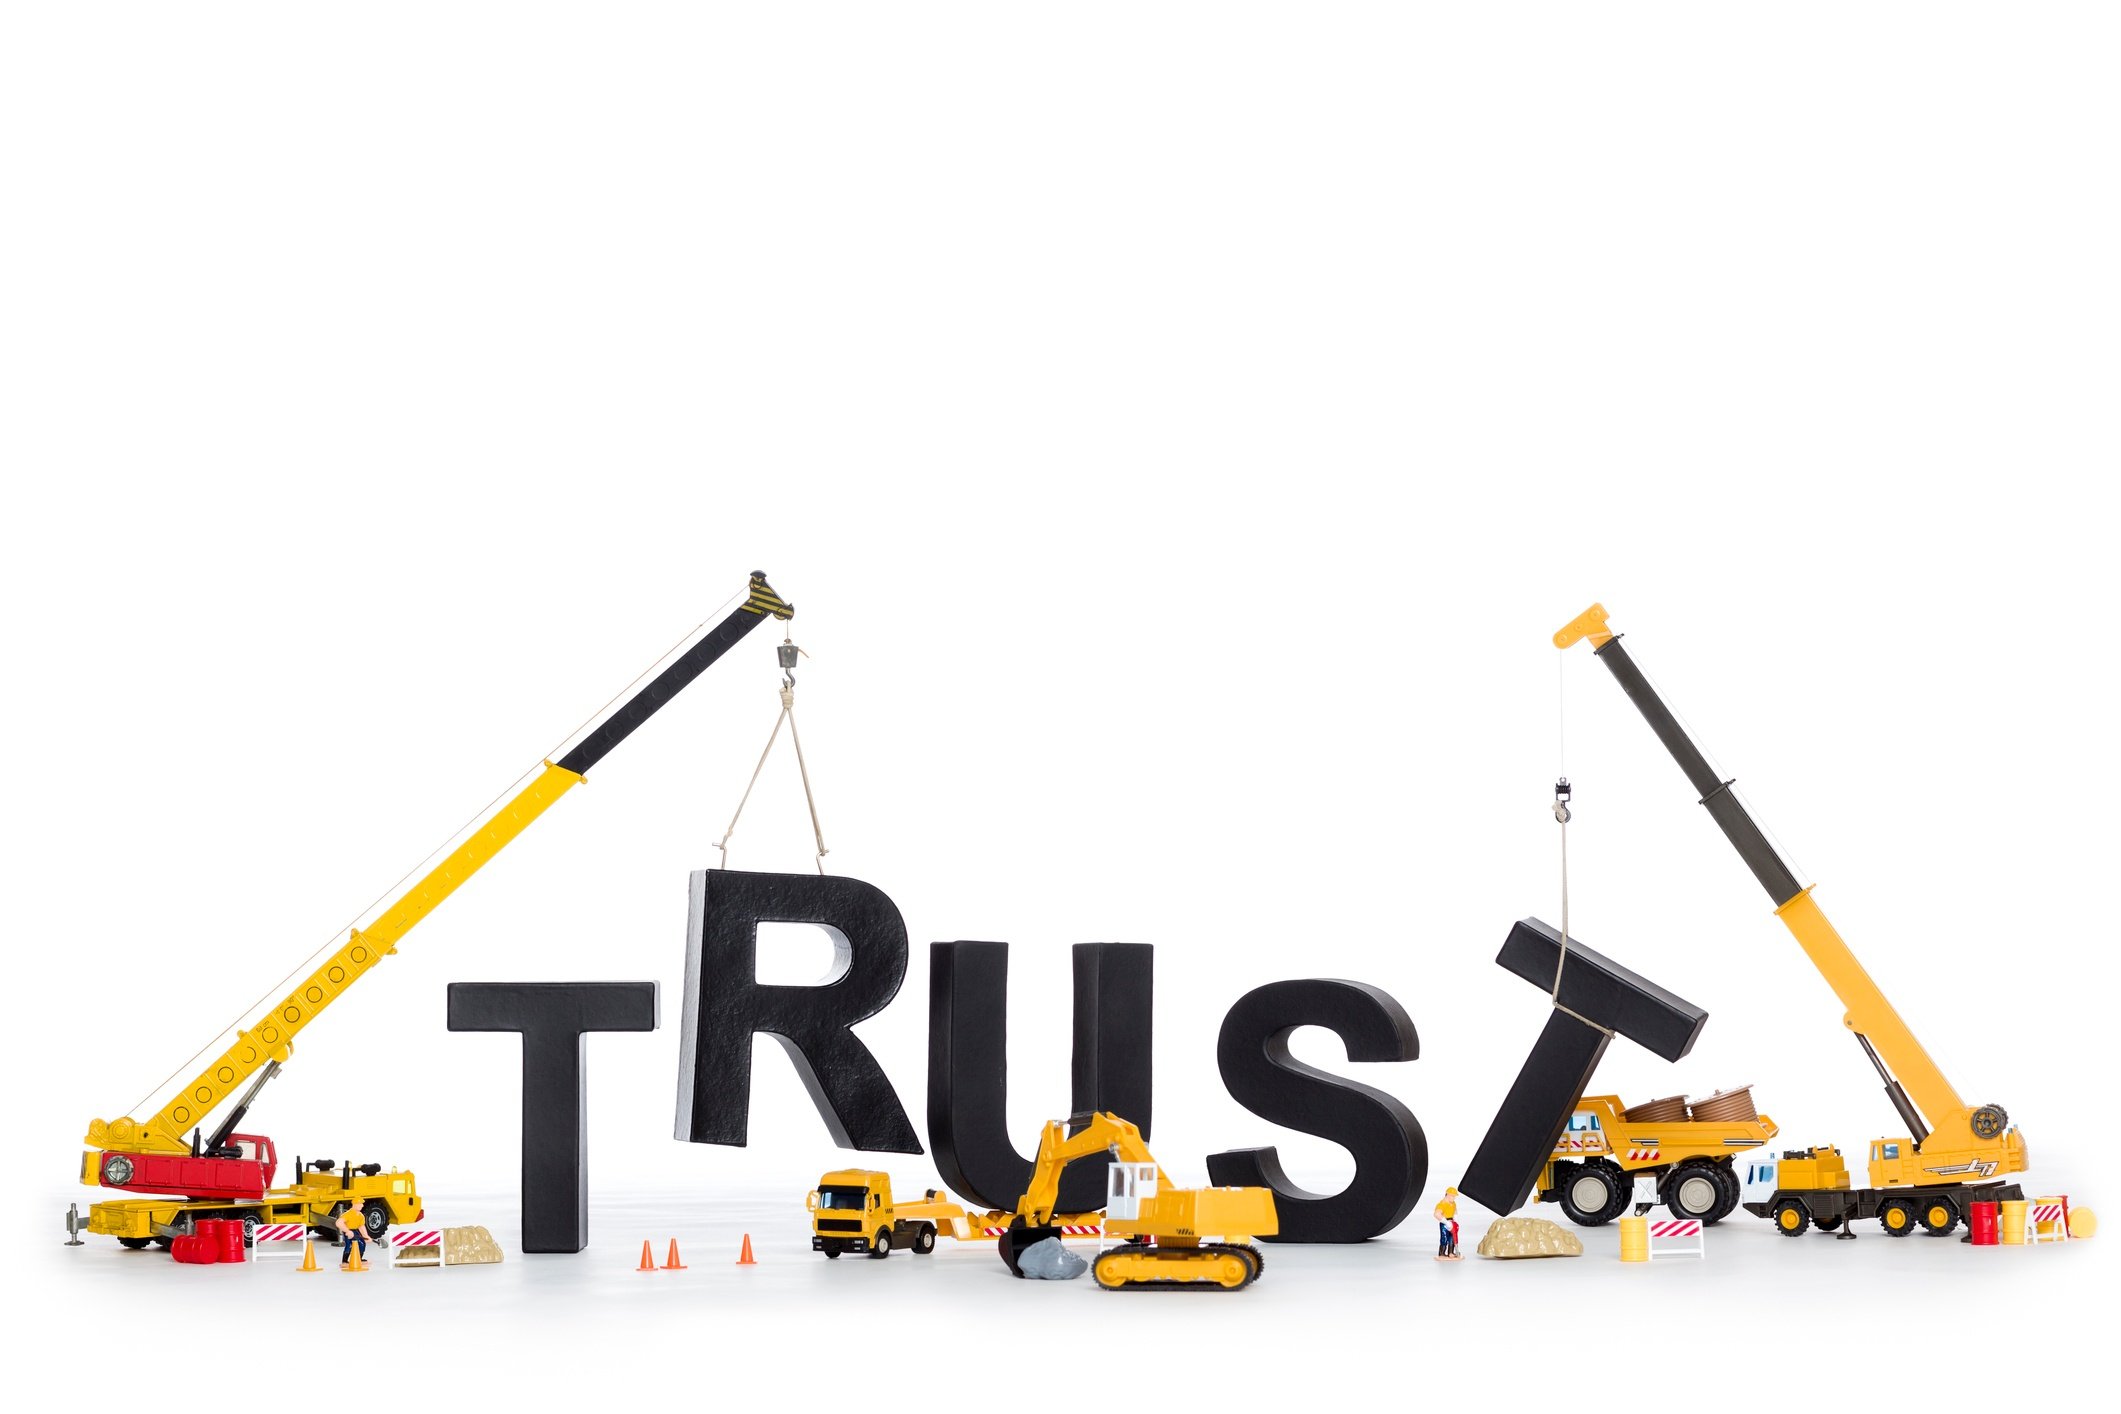 Building Trust #keepProtocol